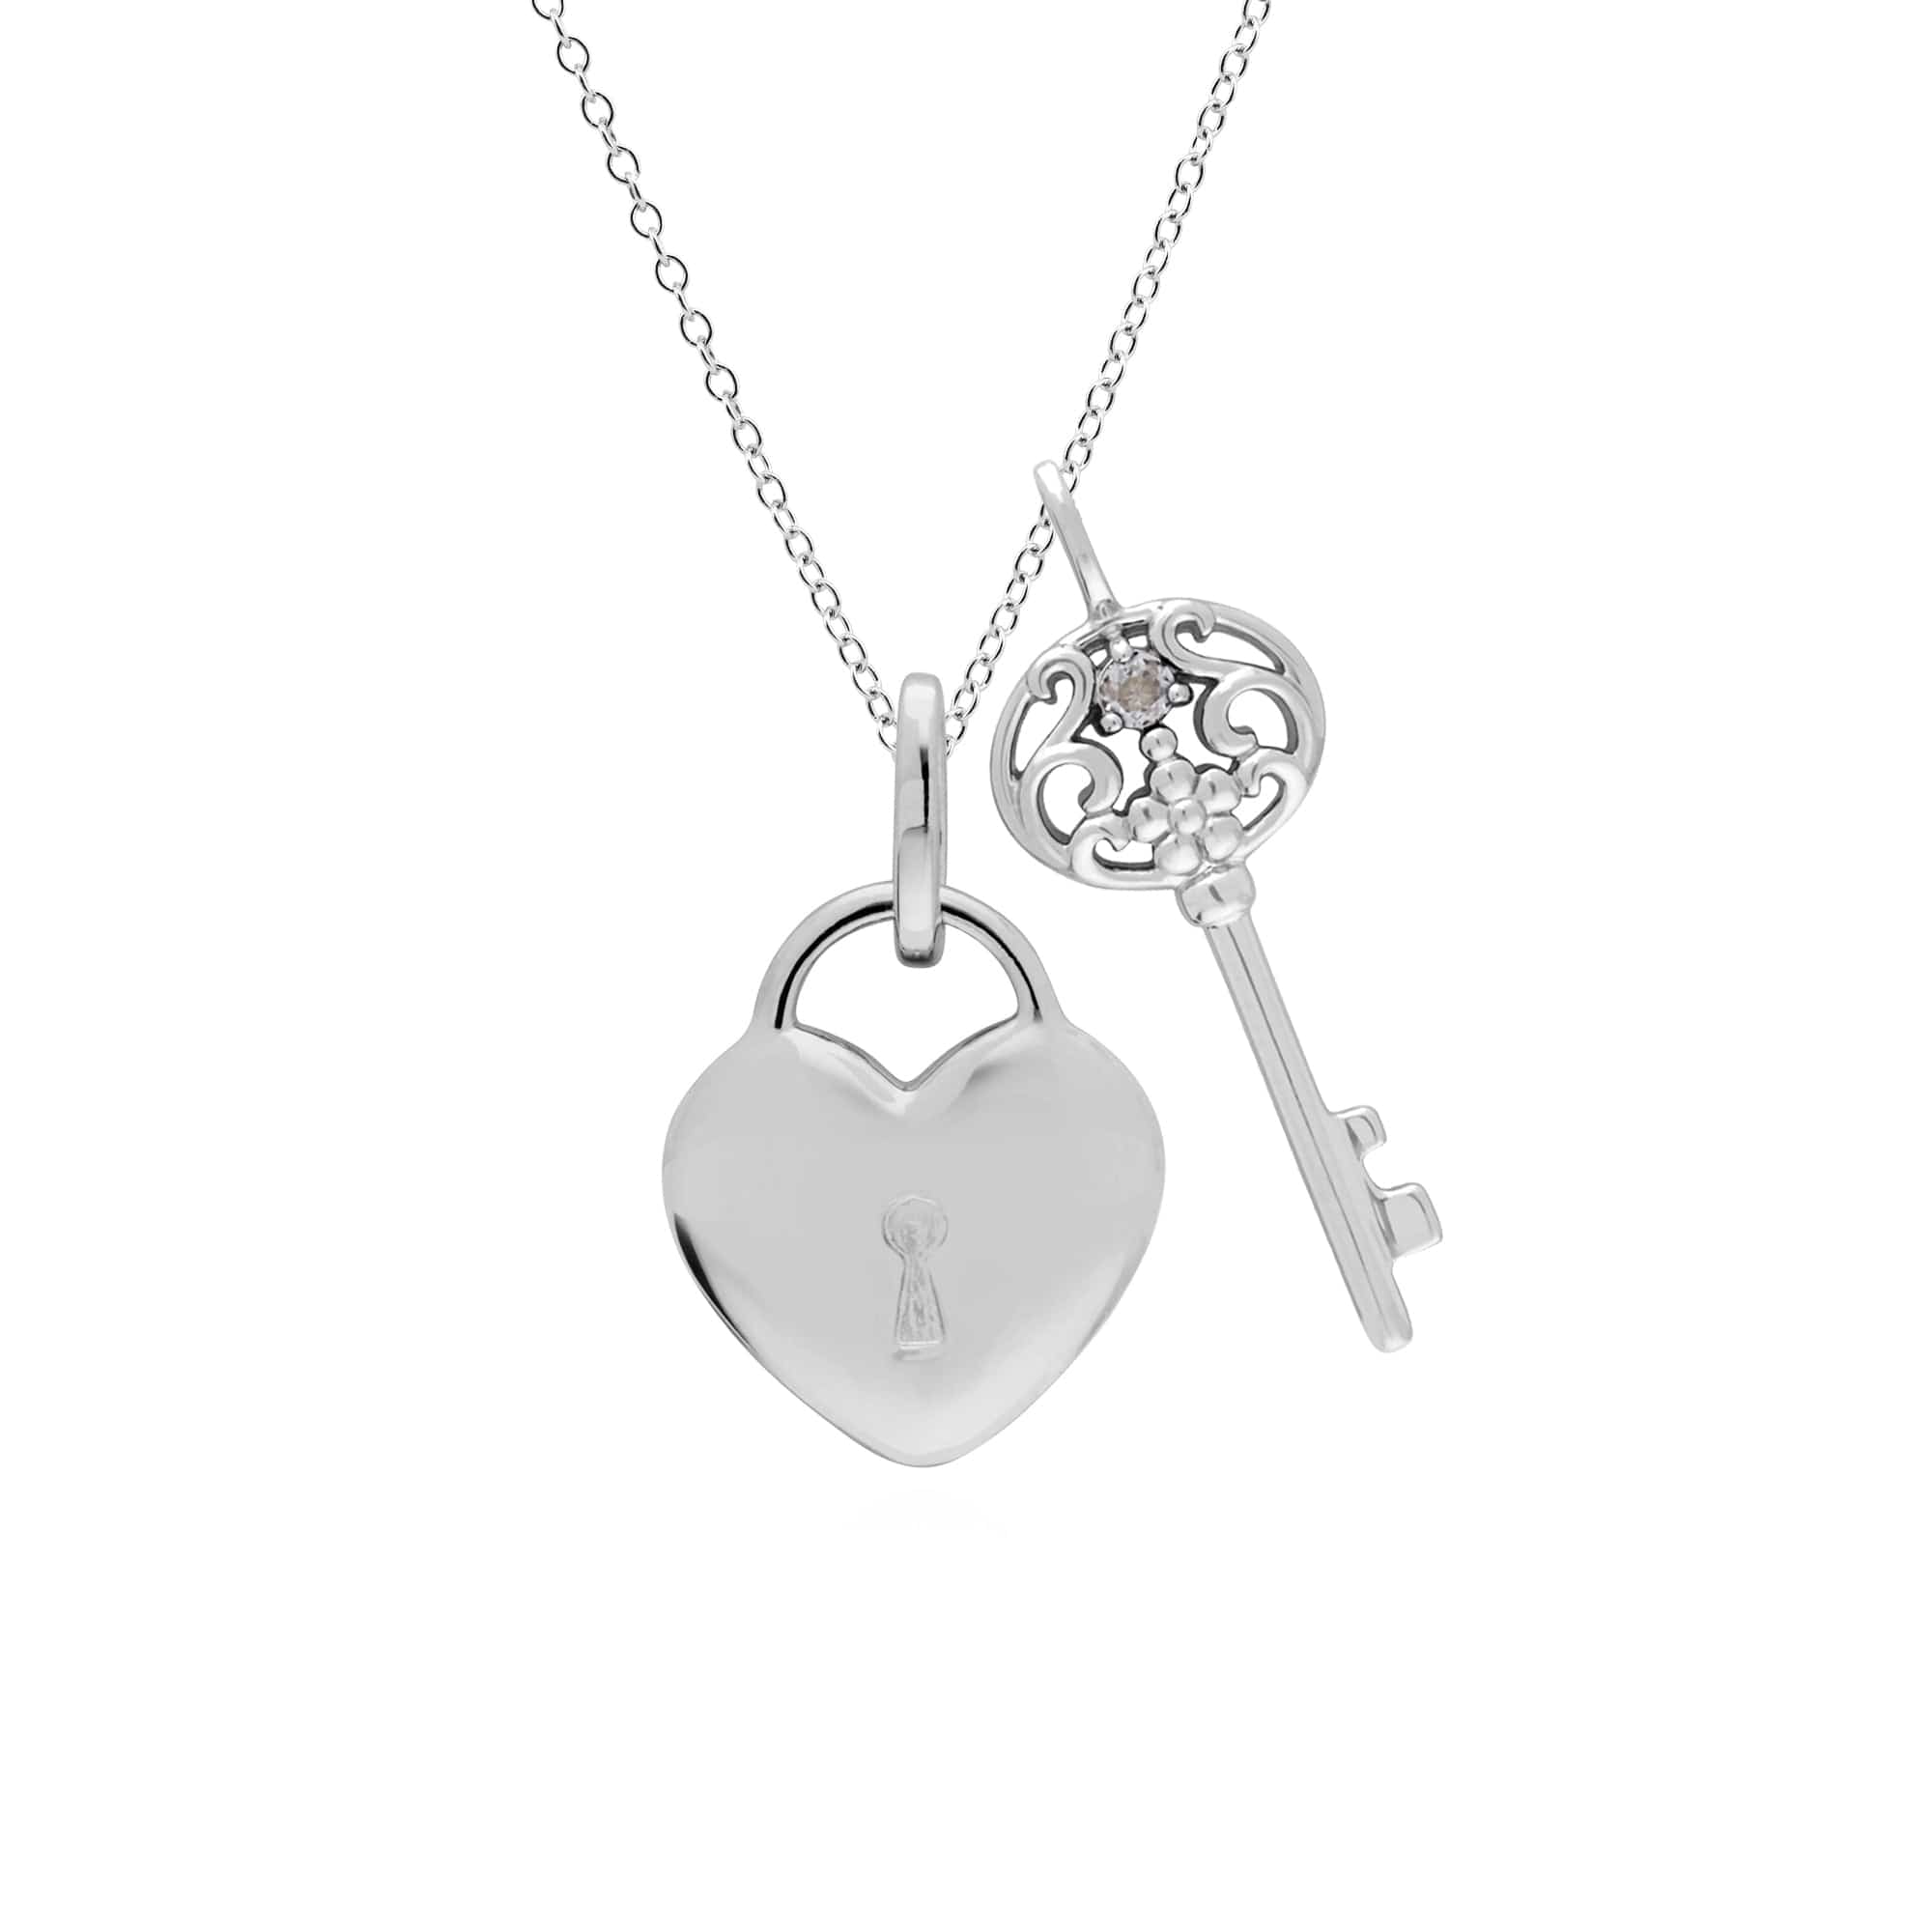 270P026814925-270P027001925 Classic Heart Lock Pendant & Clear Topaz Big Key Charm in 925 Sterling Silver 1